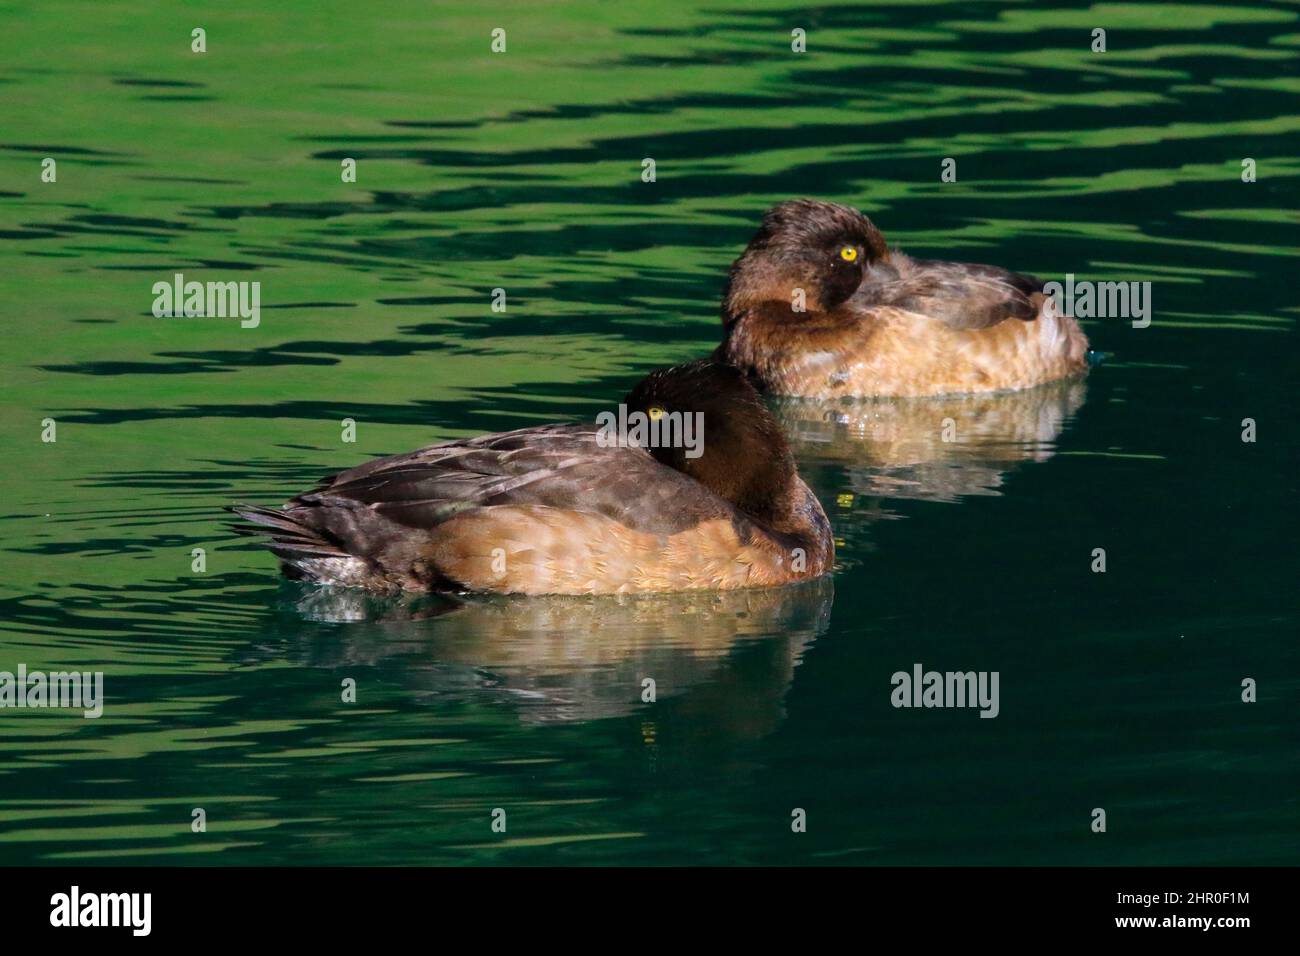 Tufted duck (Aythya fuligula) on the water in eclipse plumage Stock Photo